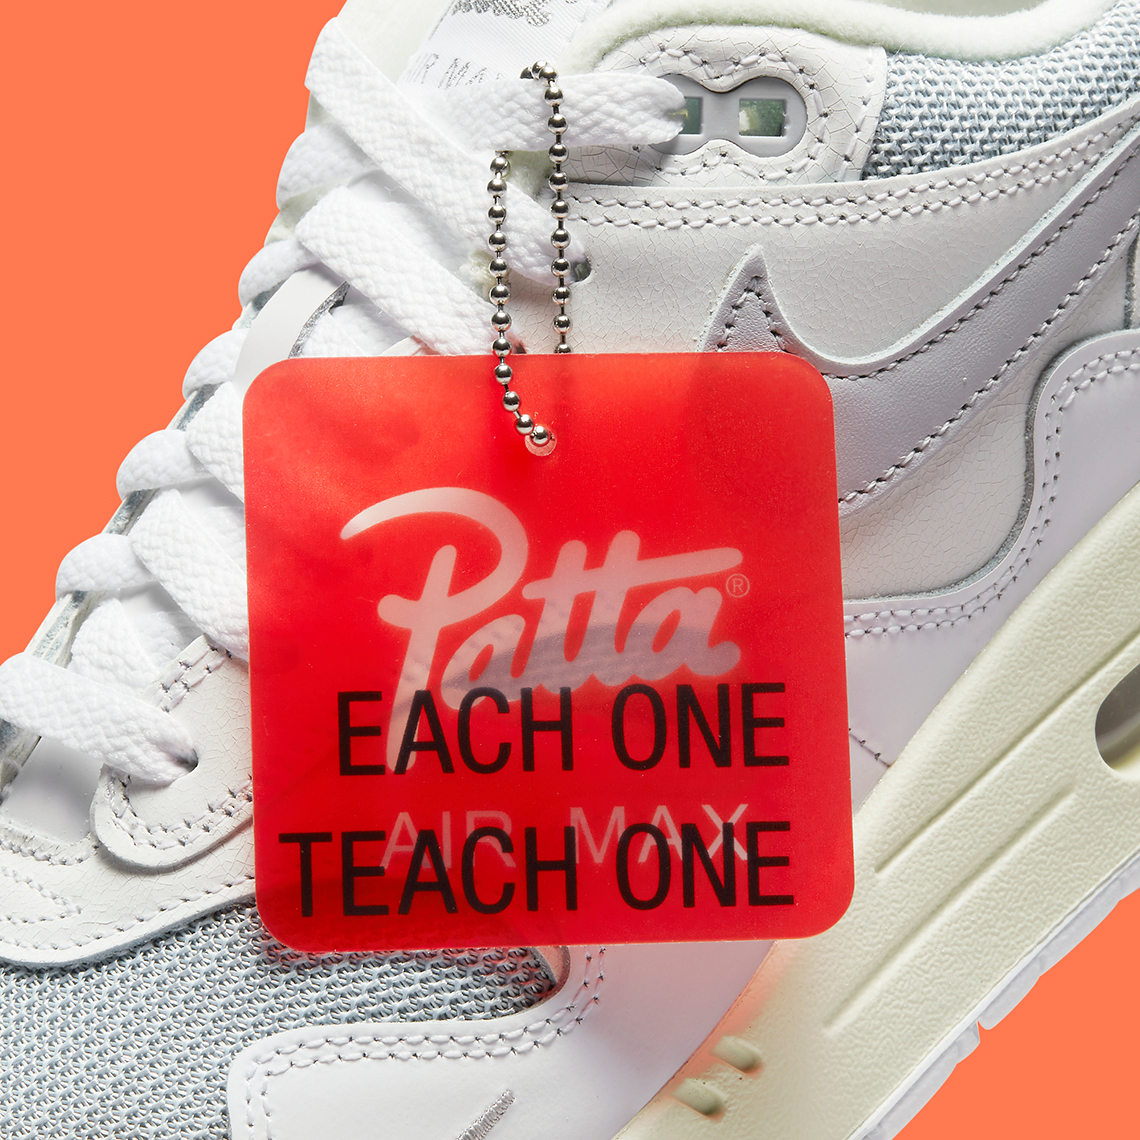 Patta Nike nike air max 2 grey and pink high tops toddlers White Silver Dq0299 100 11